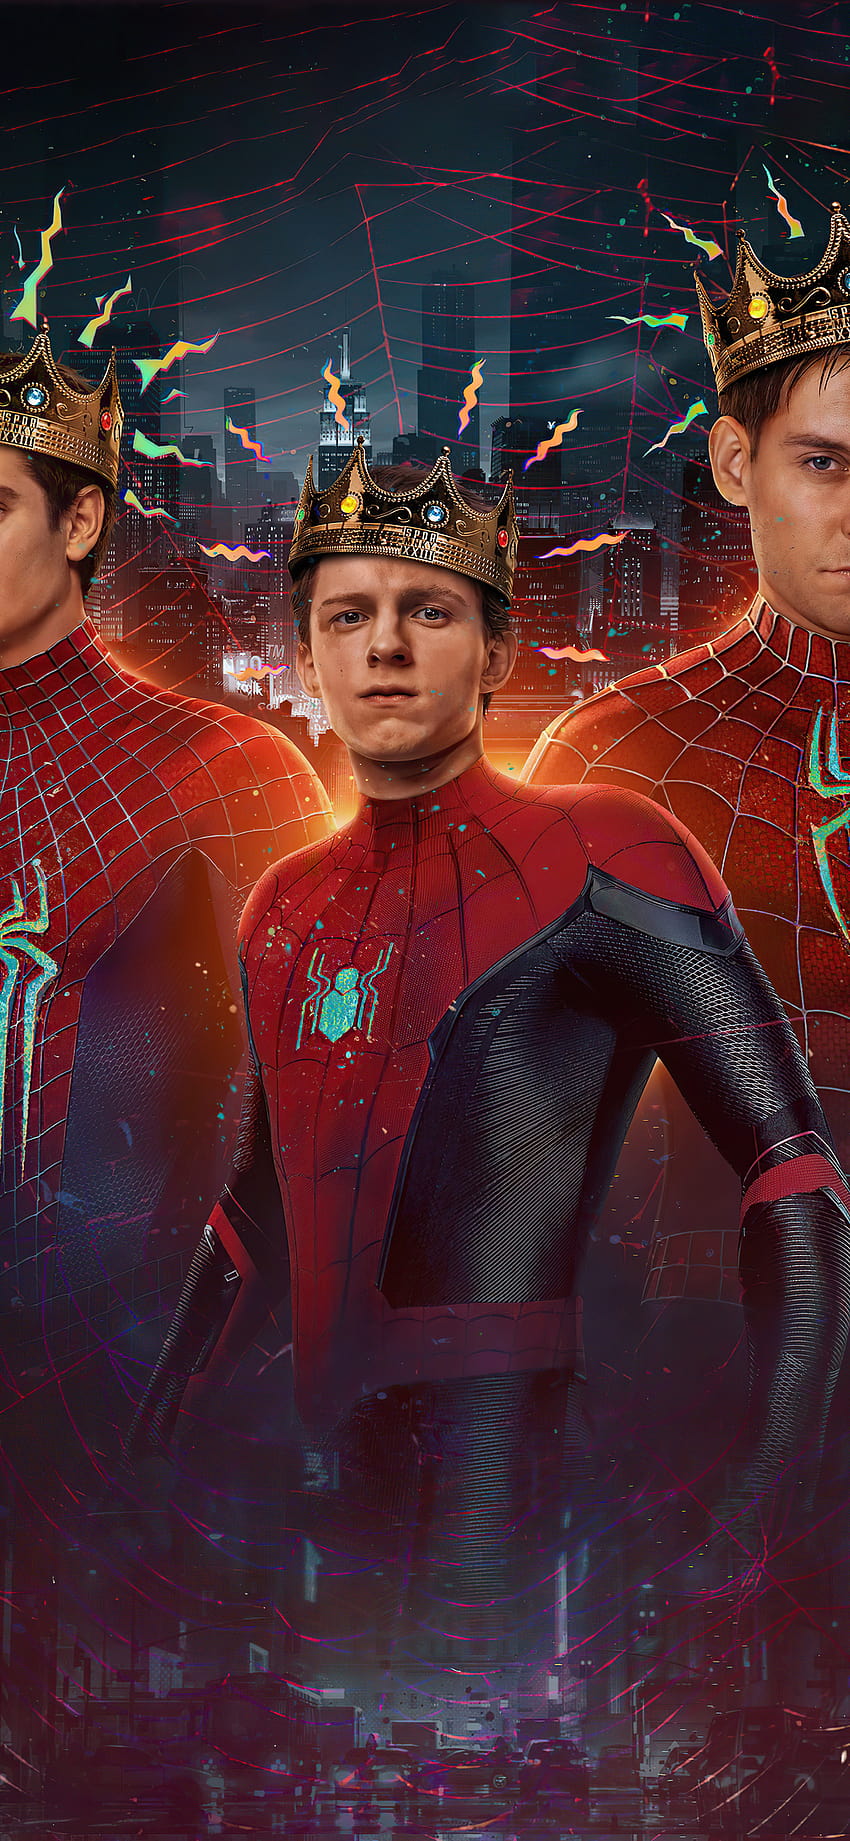 1125x2436 SpiderManNoWayHome Peterparker TobeyMaguire AndrewGarfield TomHolland Spiderverse Iphone XS, Iphone 10, Iphone X , Fundos e Papel de parede de celular HD